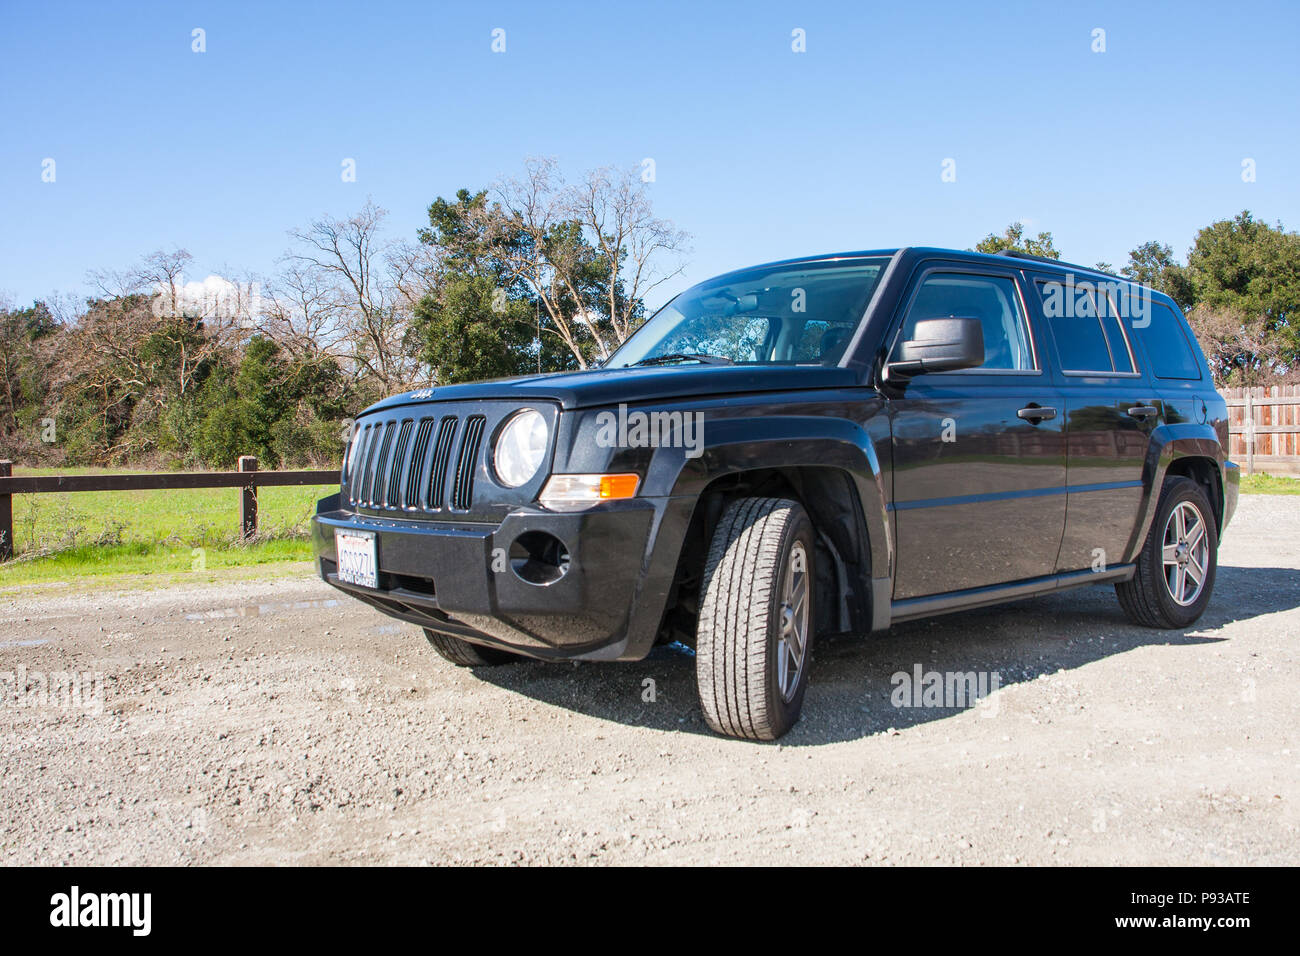 Black Jeep Patriot SUV (sport utility vehicle) in outdoor natural background with California license plate - side view Stock Photo